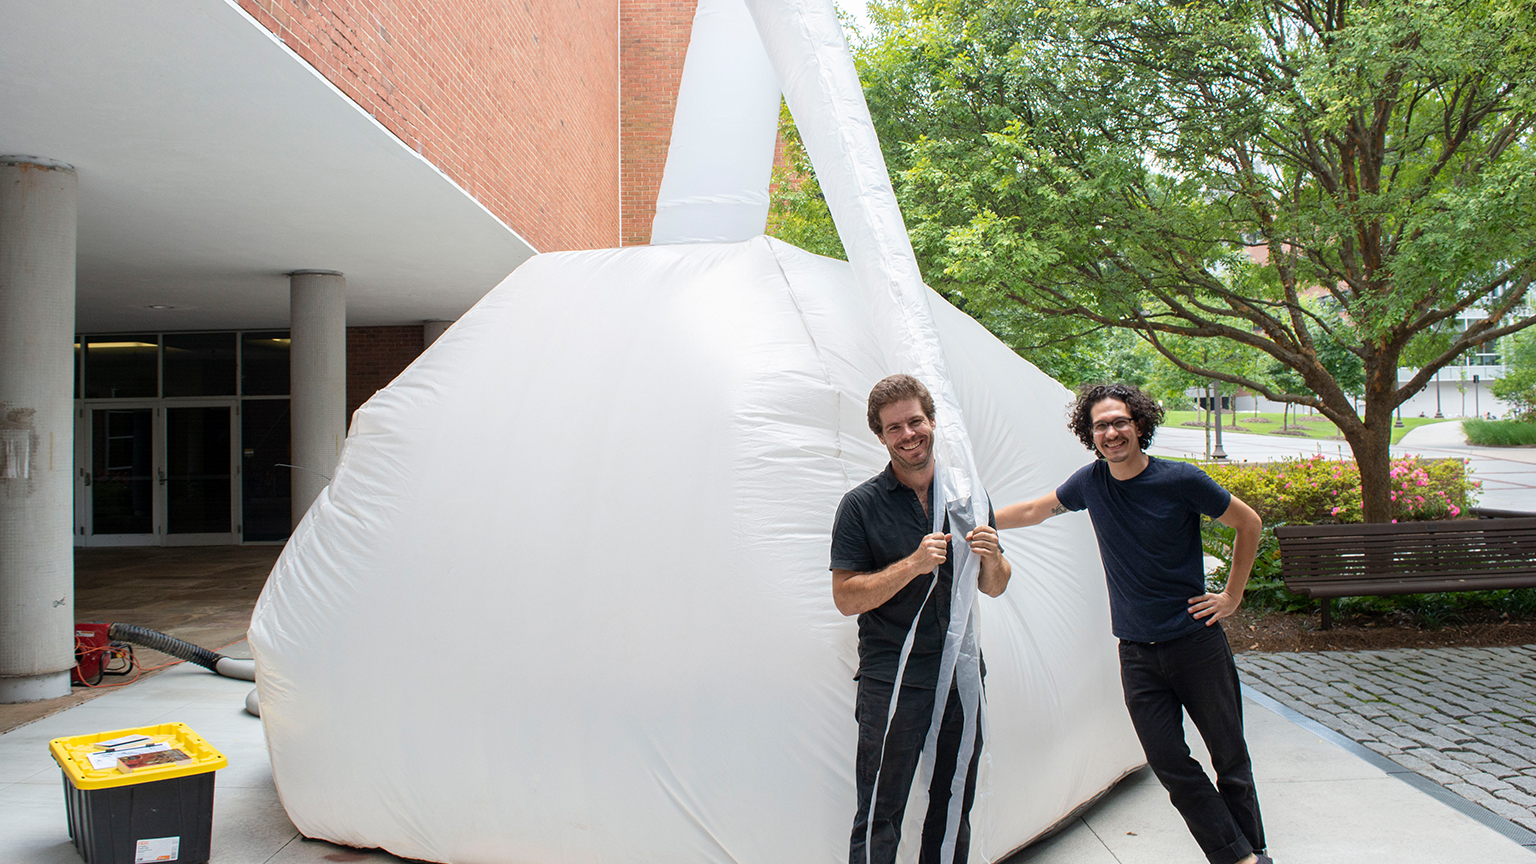 Michael Koliner (Master of Architecture, '20) and Jonathan Dessi-Olive at a "pop-up" of an independent study project on inflatables